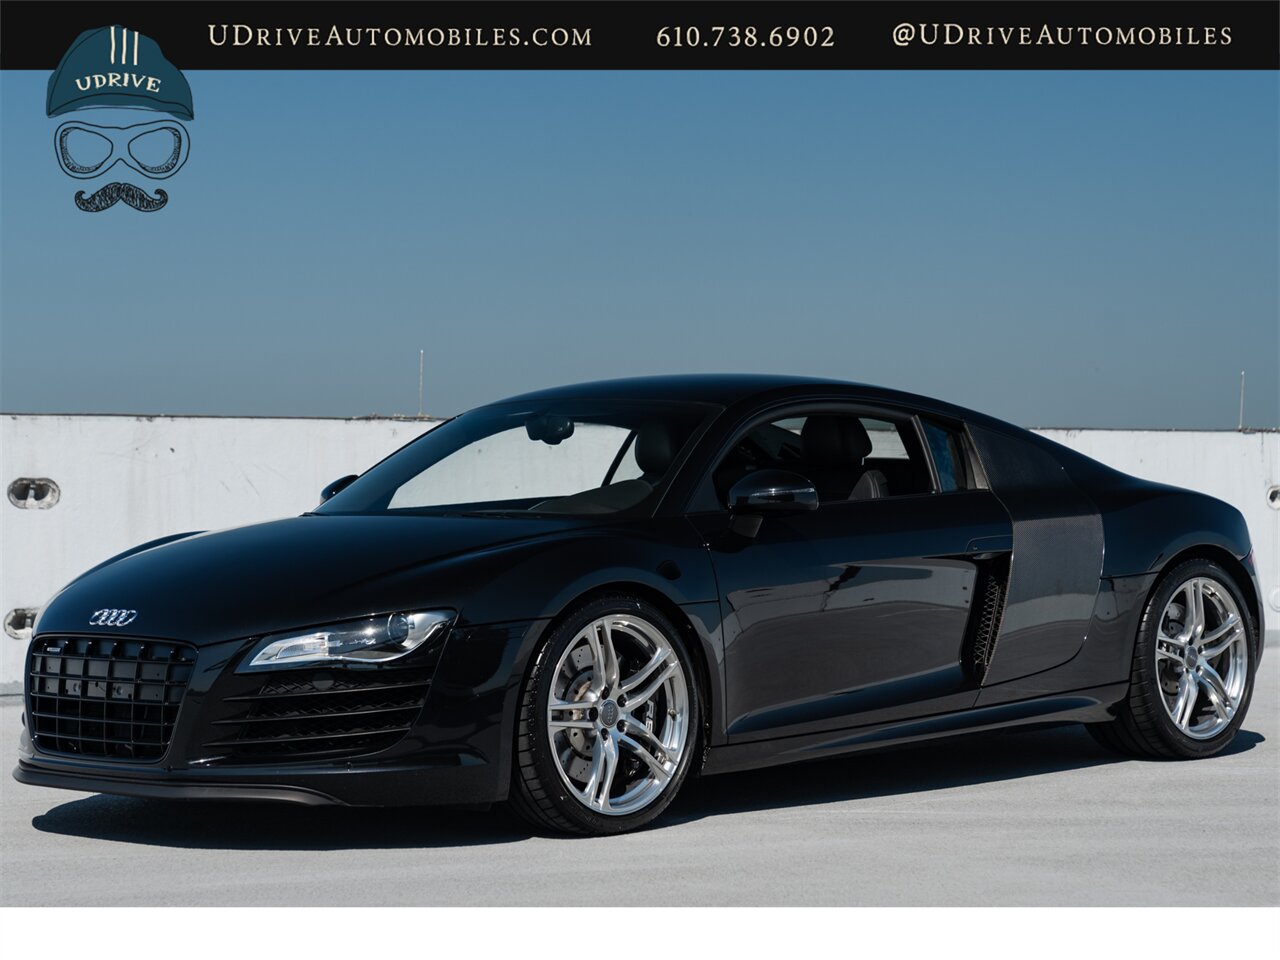 2009 Audi R8 Quattro  4.2L V8 6 Speed Manual - Photo 11 - West Chester, PA 19382